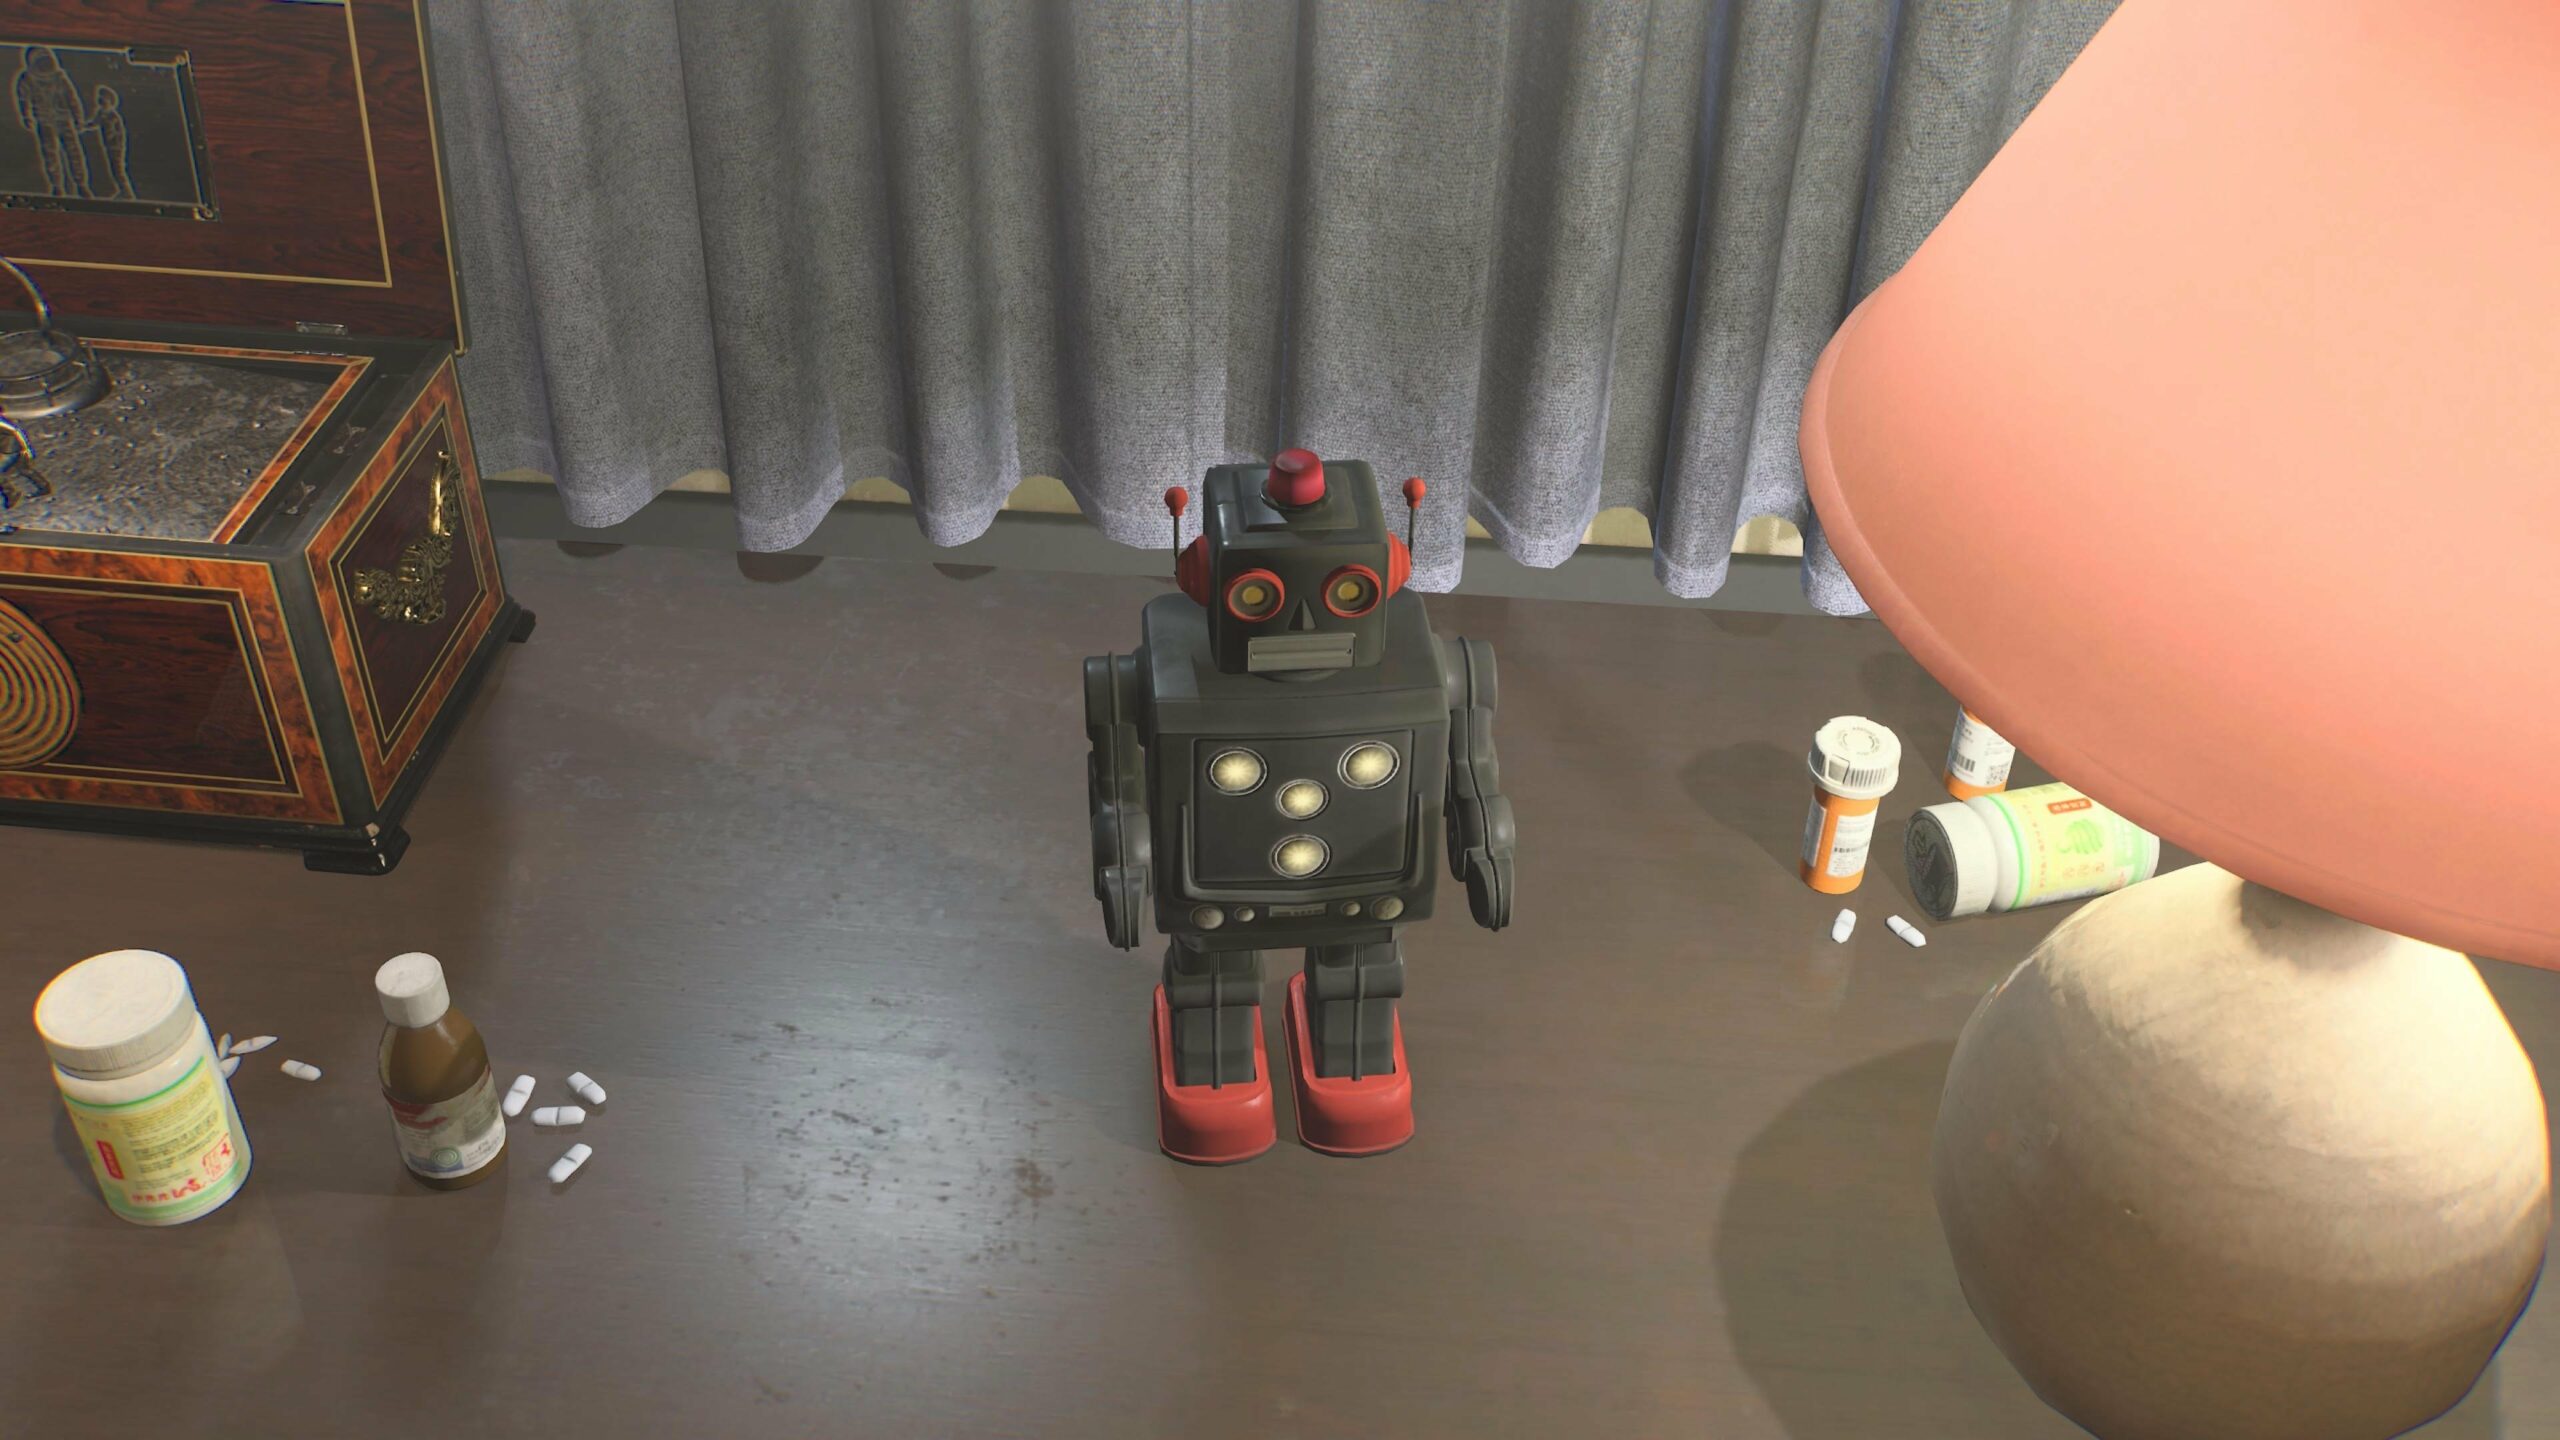 A toy robot in Returnal